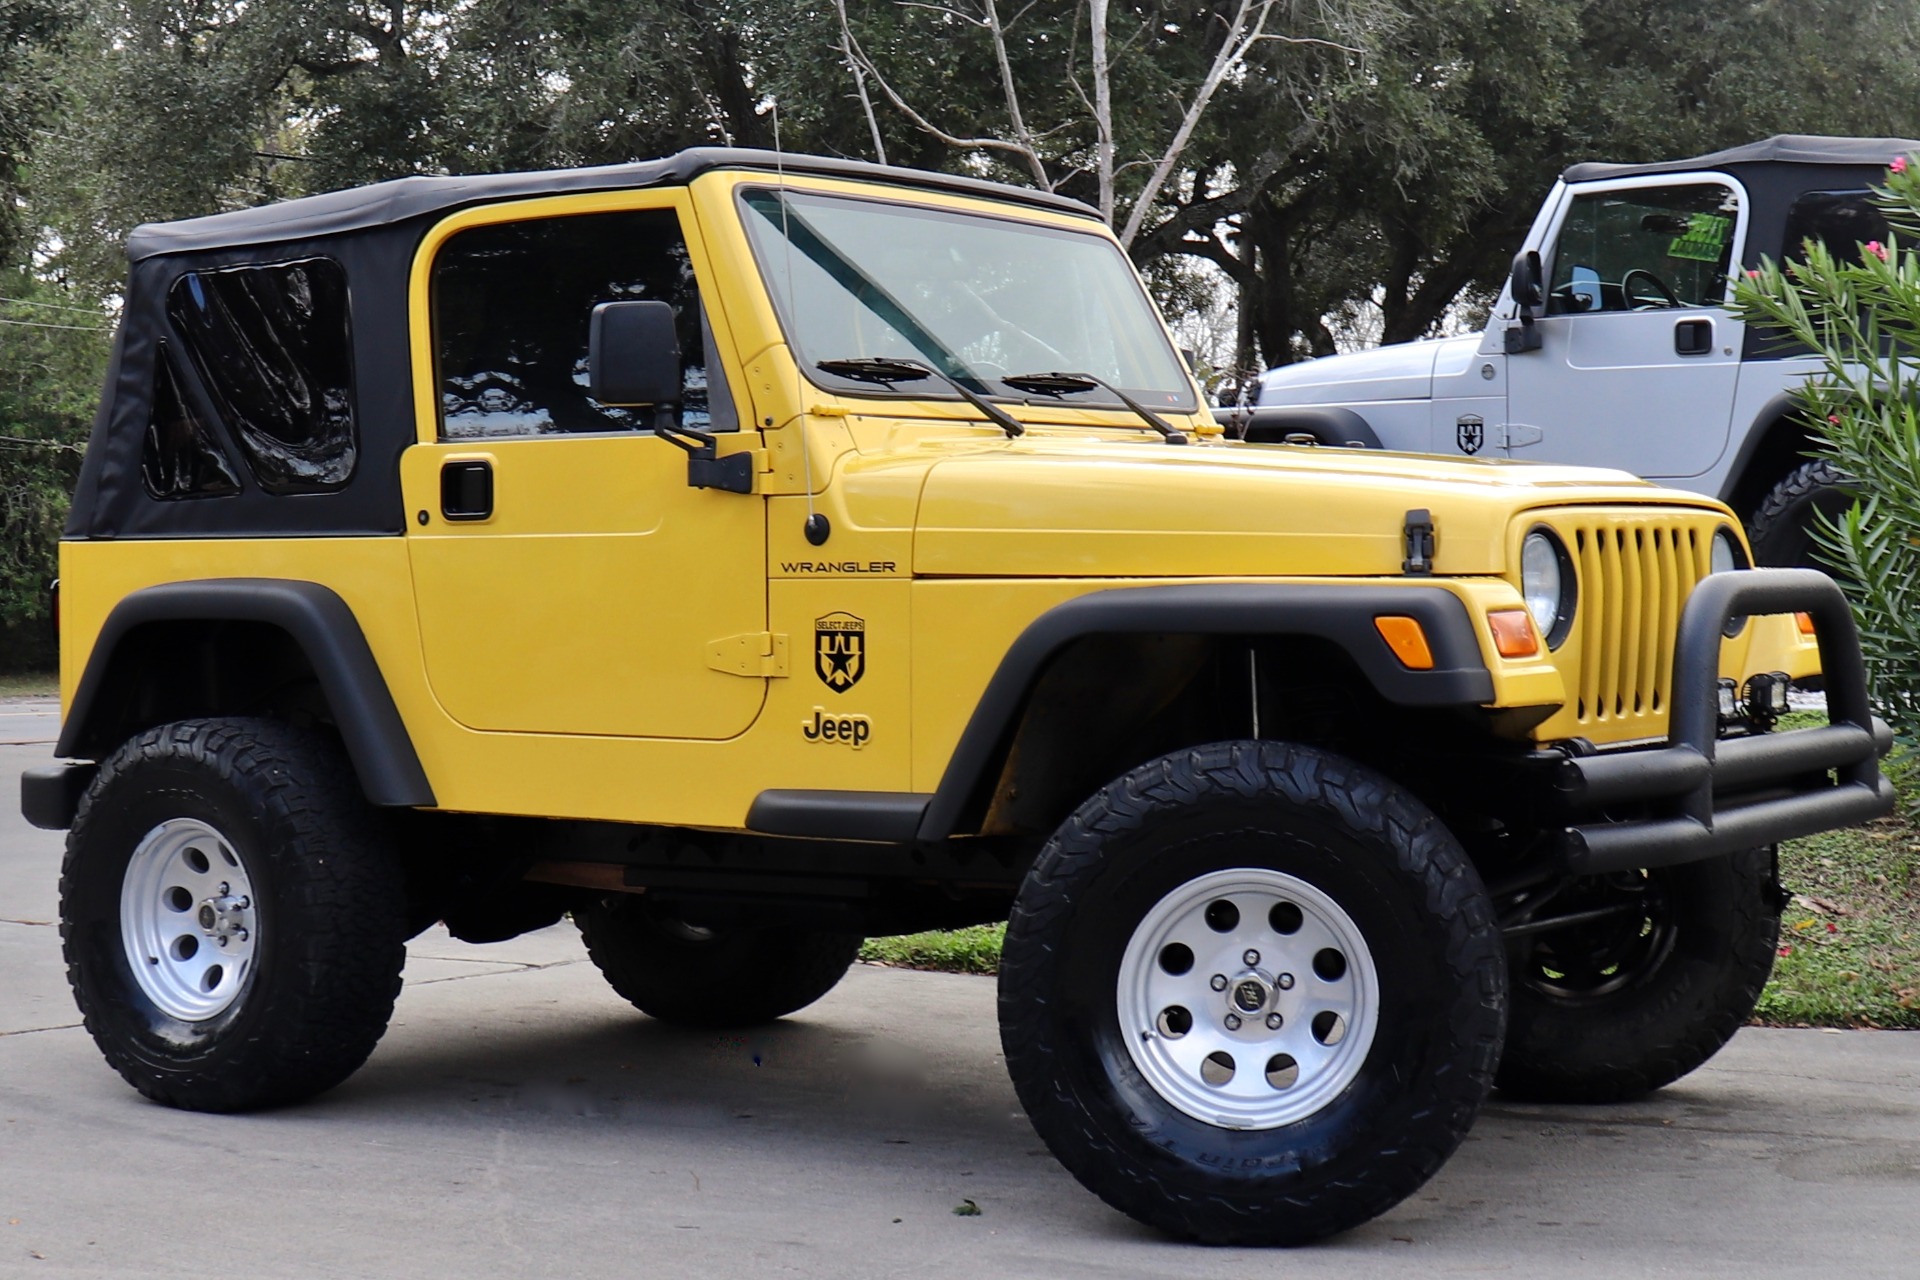 Used 2002 Jeep Wrangler X For Sale ($14,995) | Select Jeeps Inc. Stock  #736214